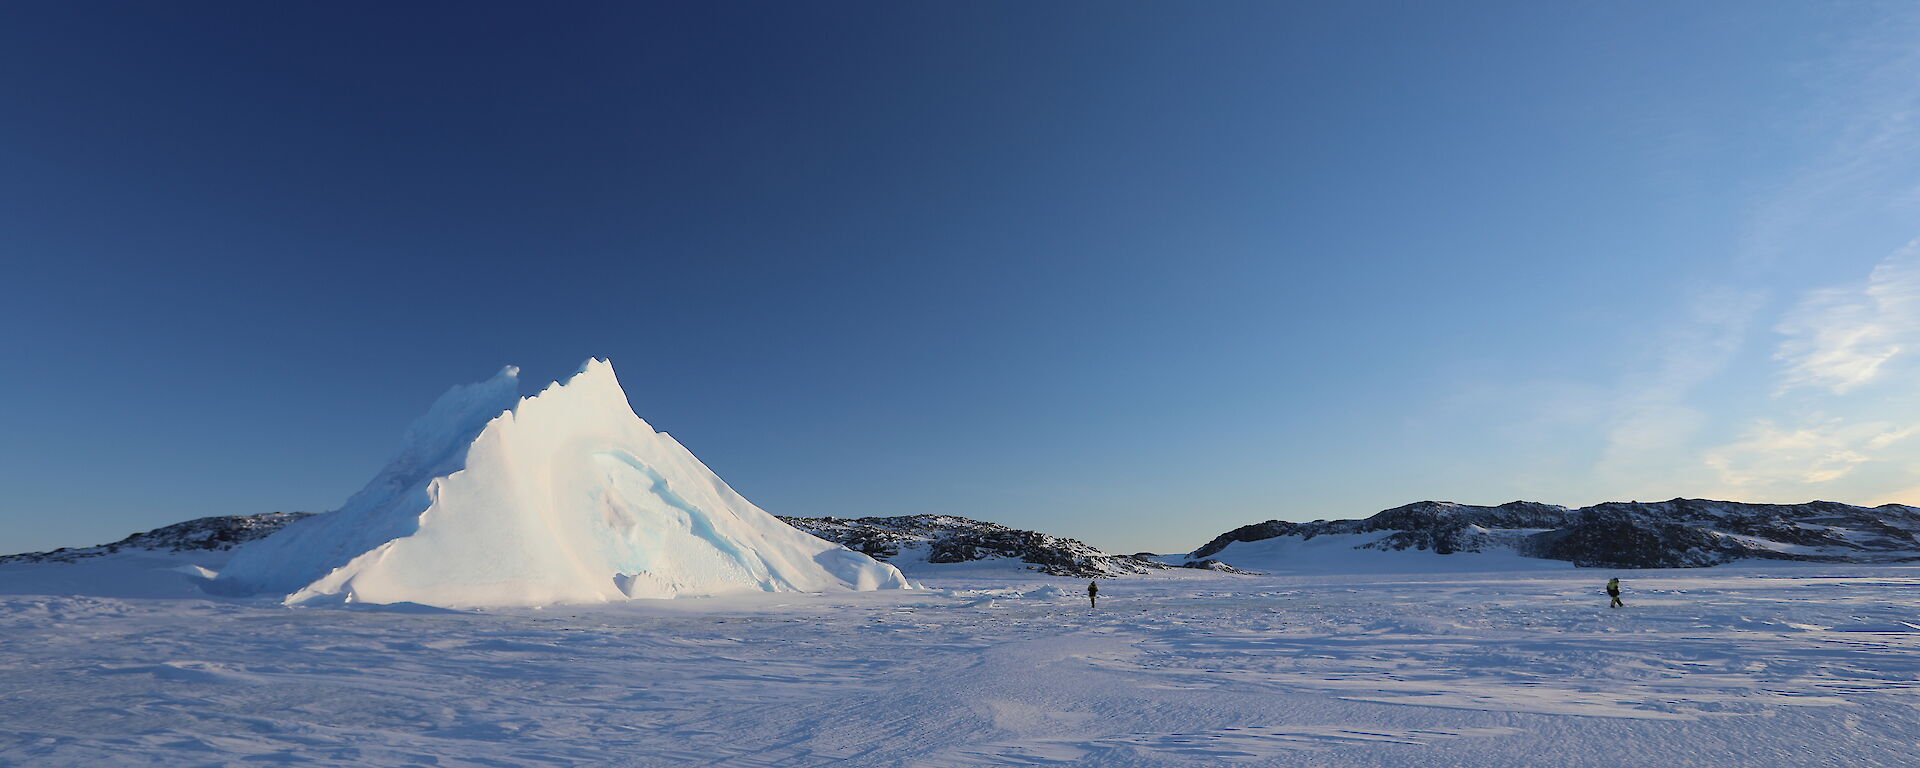 Expanse of sea-ice with pyramid ice berg sticking up out of it, two people walking across sea-ice towards the burg. Bright blue sky above, rocky hills in background